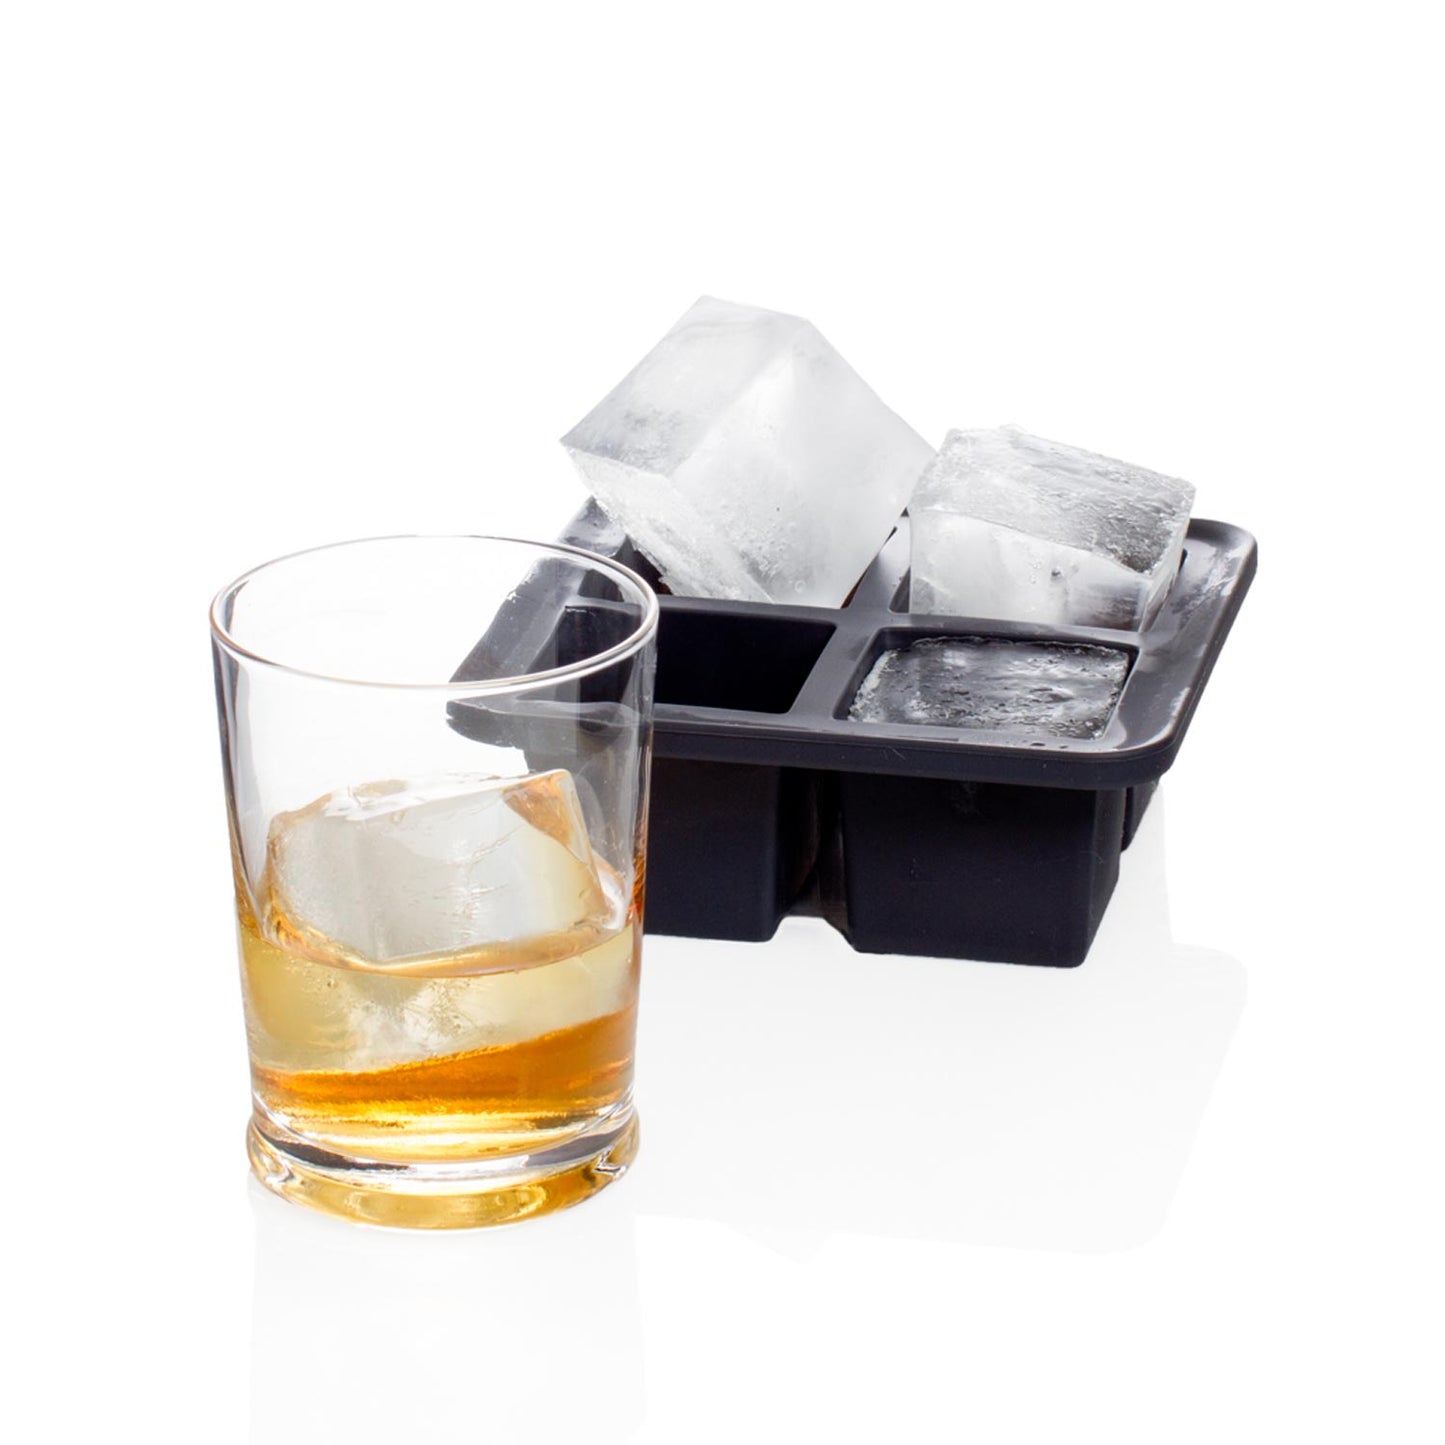 Cocktail Cubes - Extra Large Silicone Ice Cube Trays - 2.5 Inches - Bl –  Kasian House